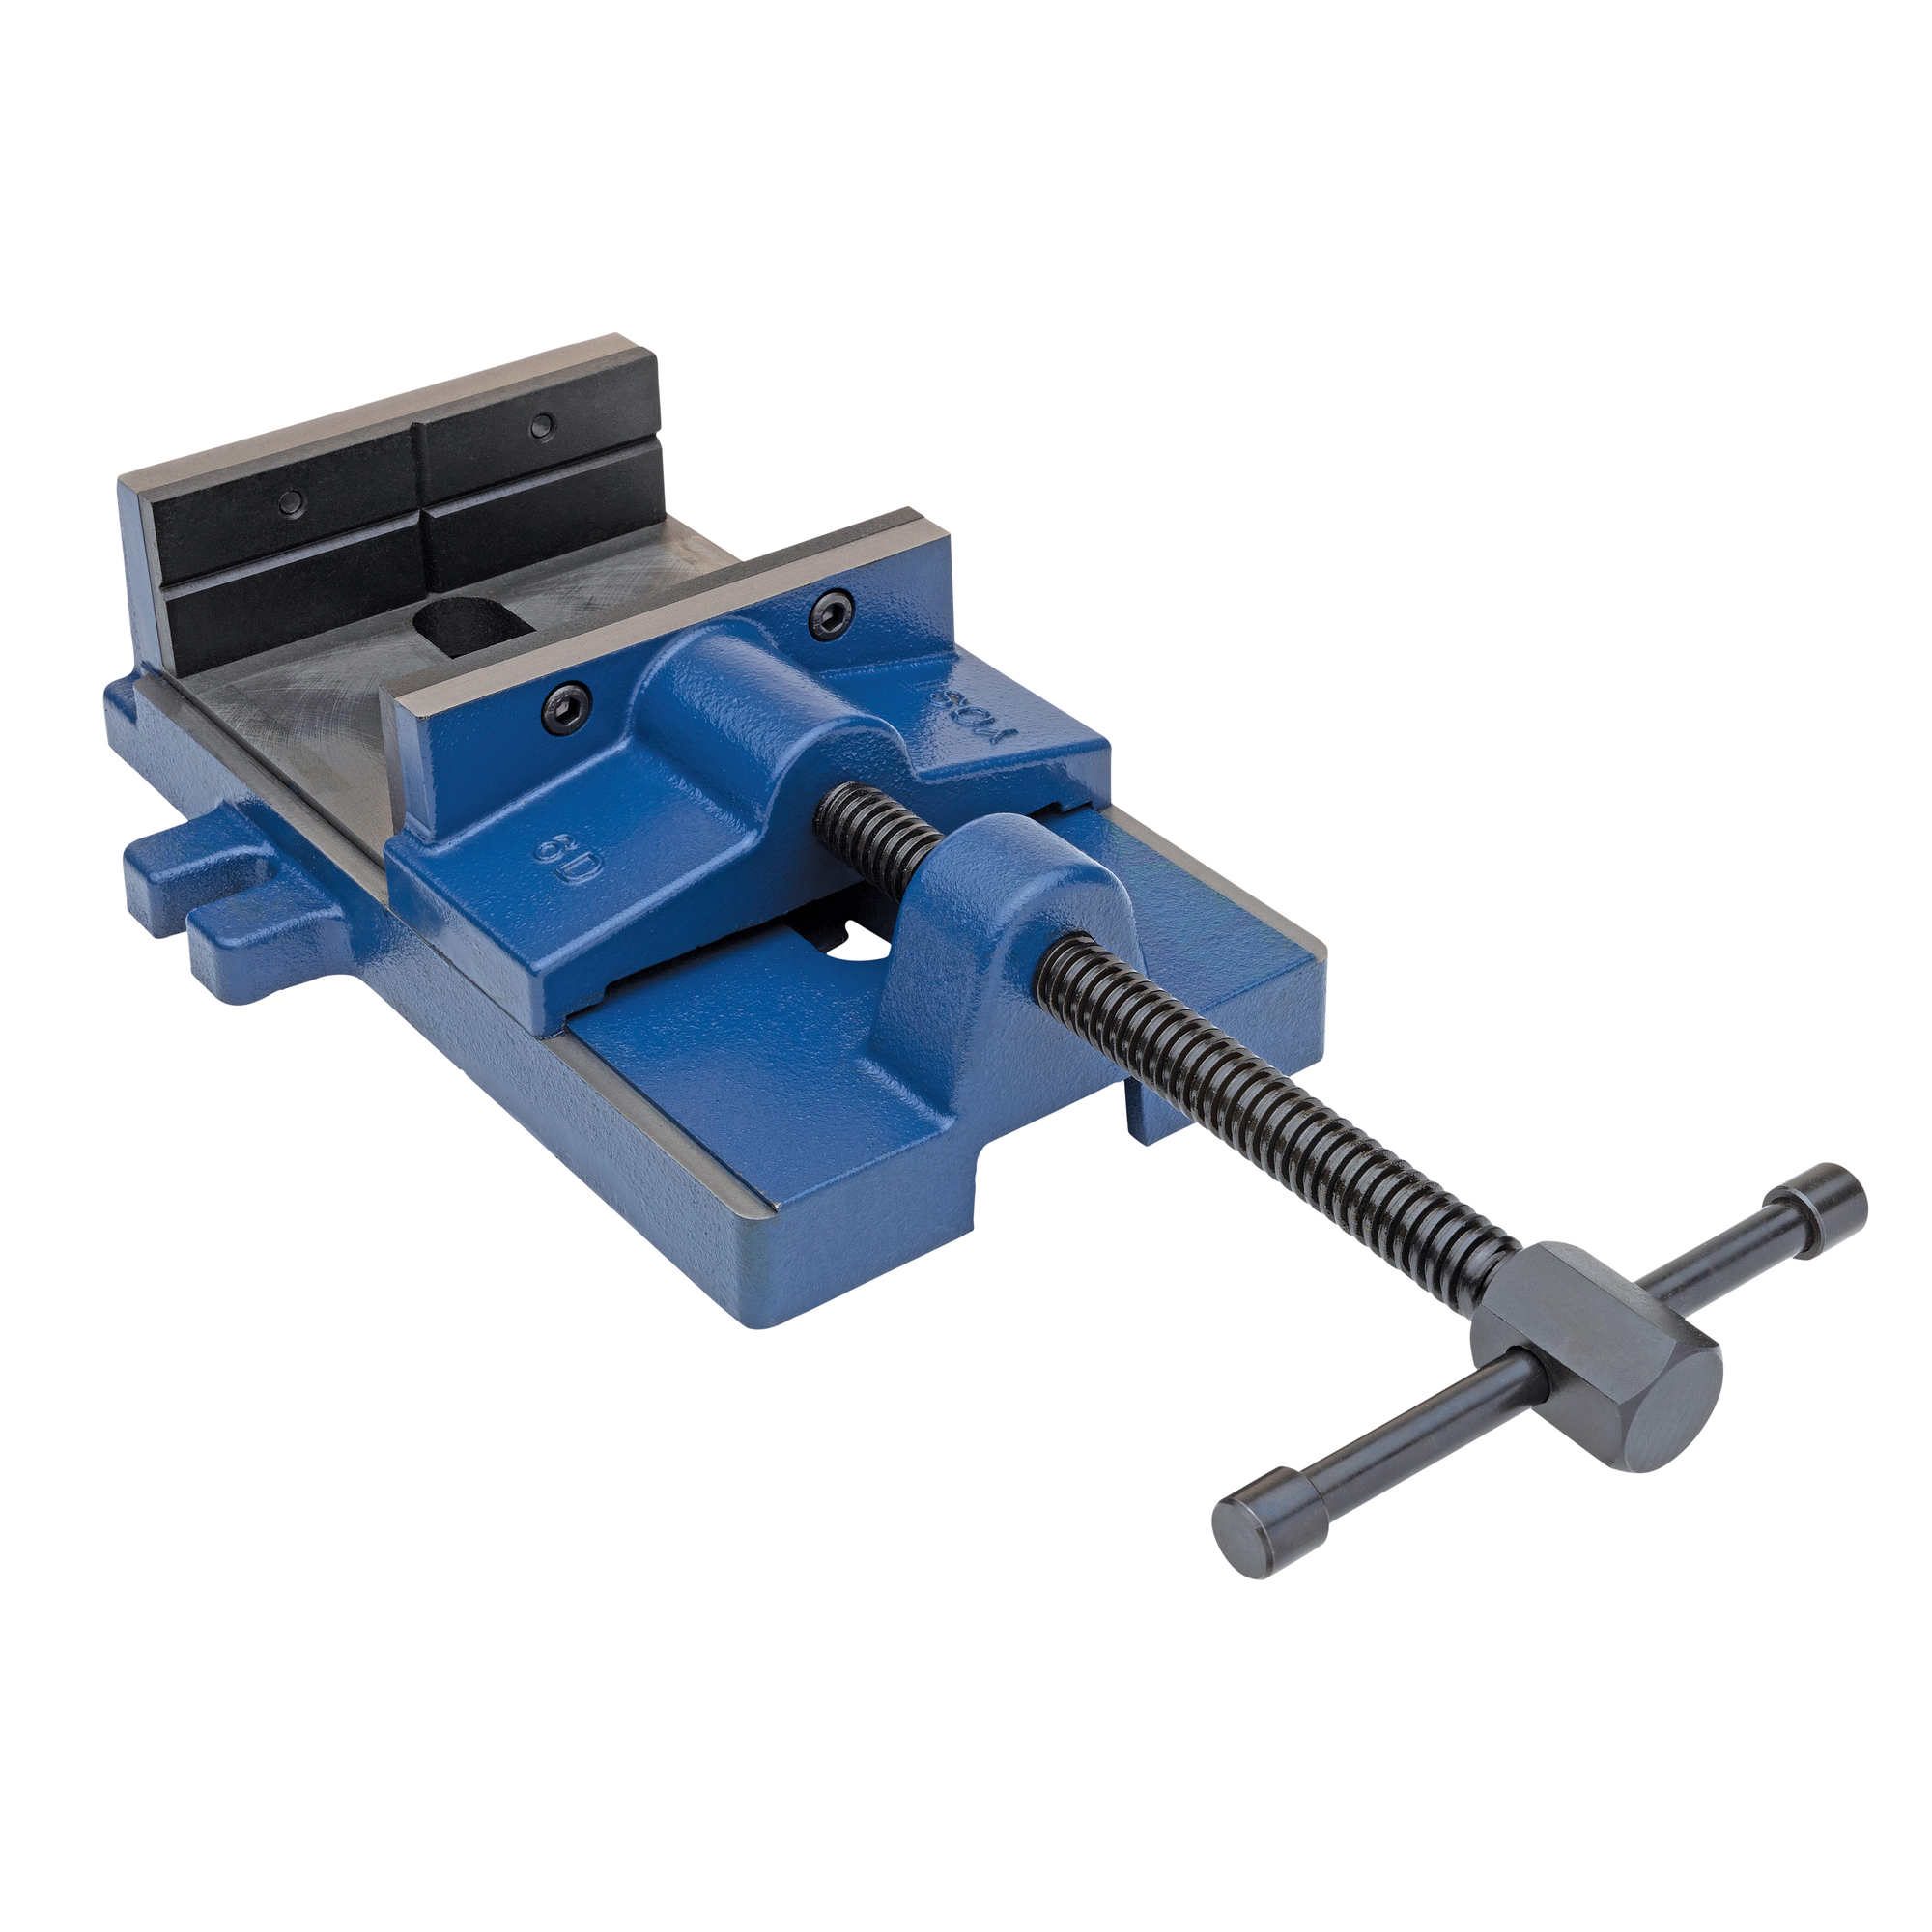 Yost Vises, 6Inch Drill Press Vise, Jaw Width 6 in, Jaw Capacity 6 in, Material Cast Iron, Model 6D